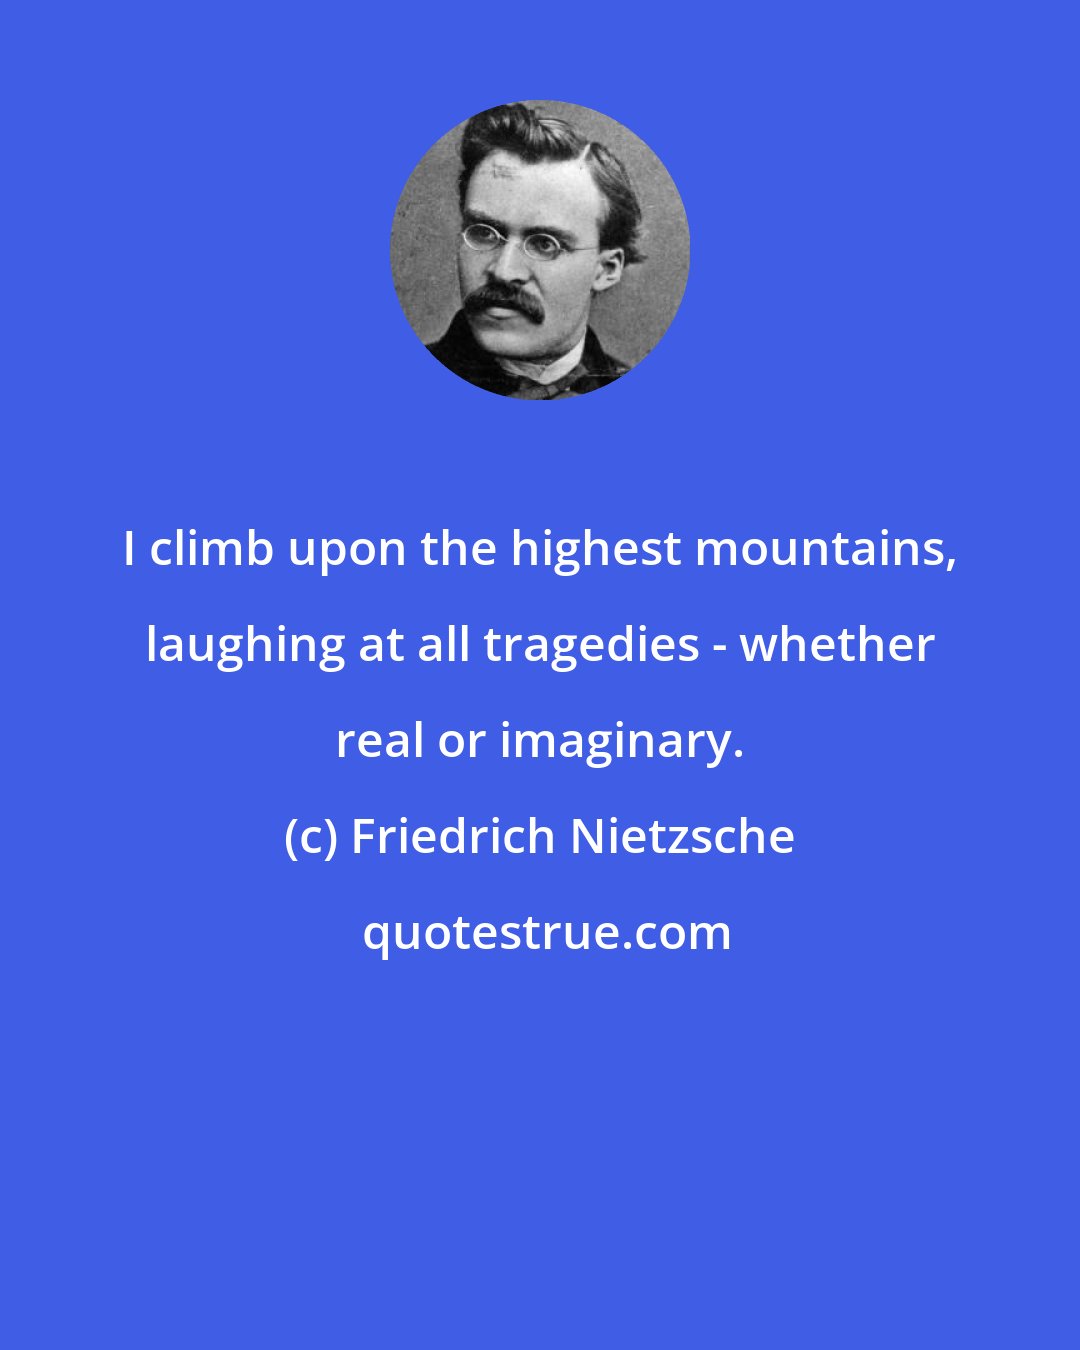 Friedrich Nietzsche: I climb upon the highest mountains, laughing at all tragedies - whether real or imaginary.